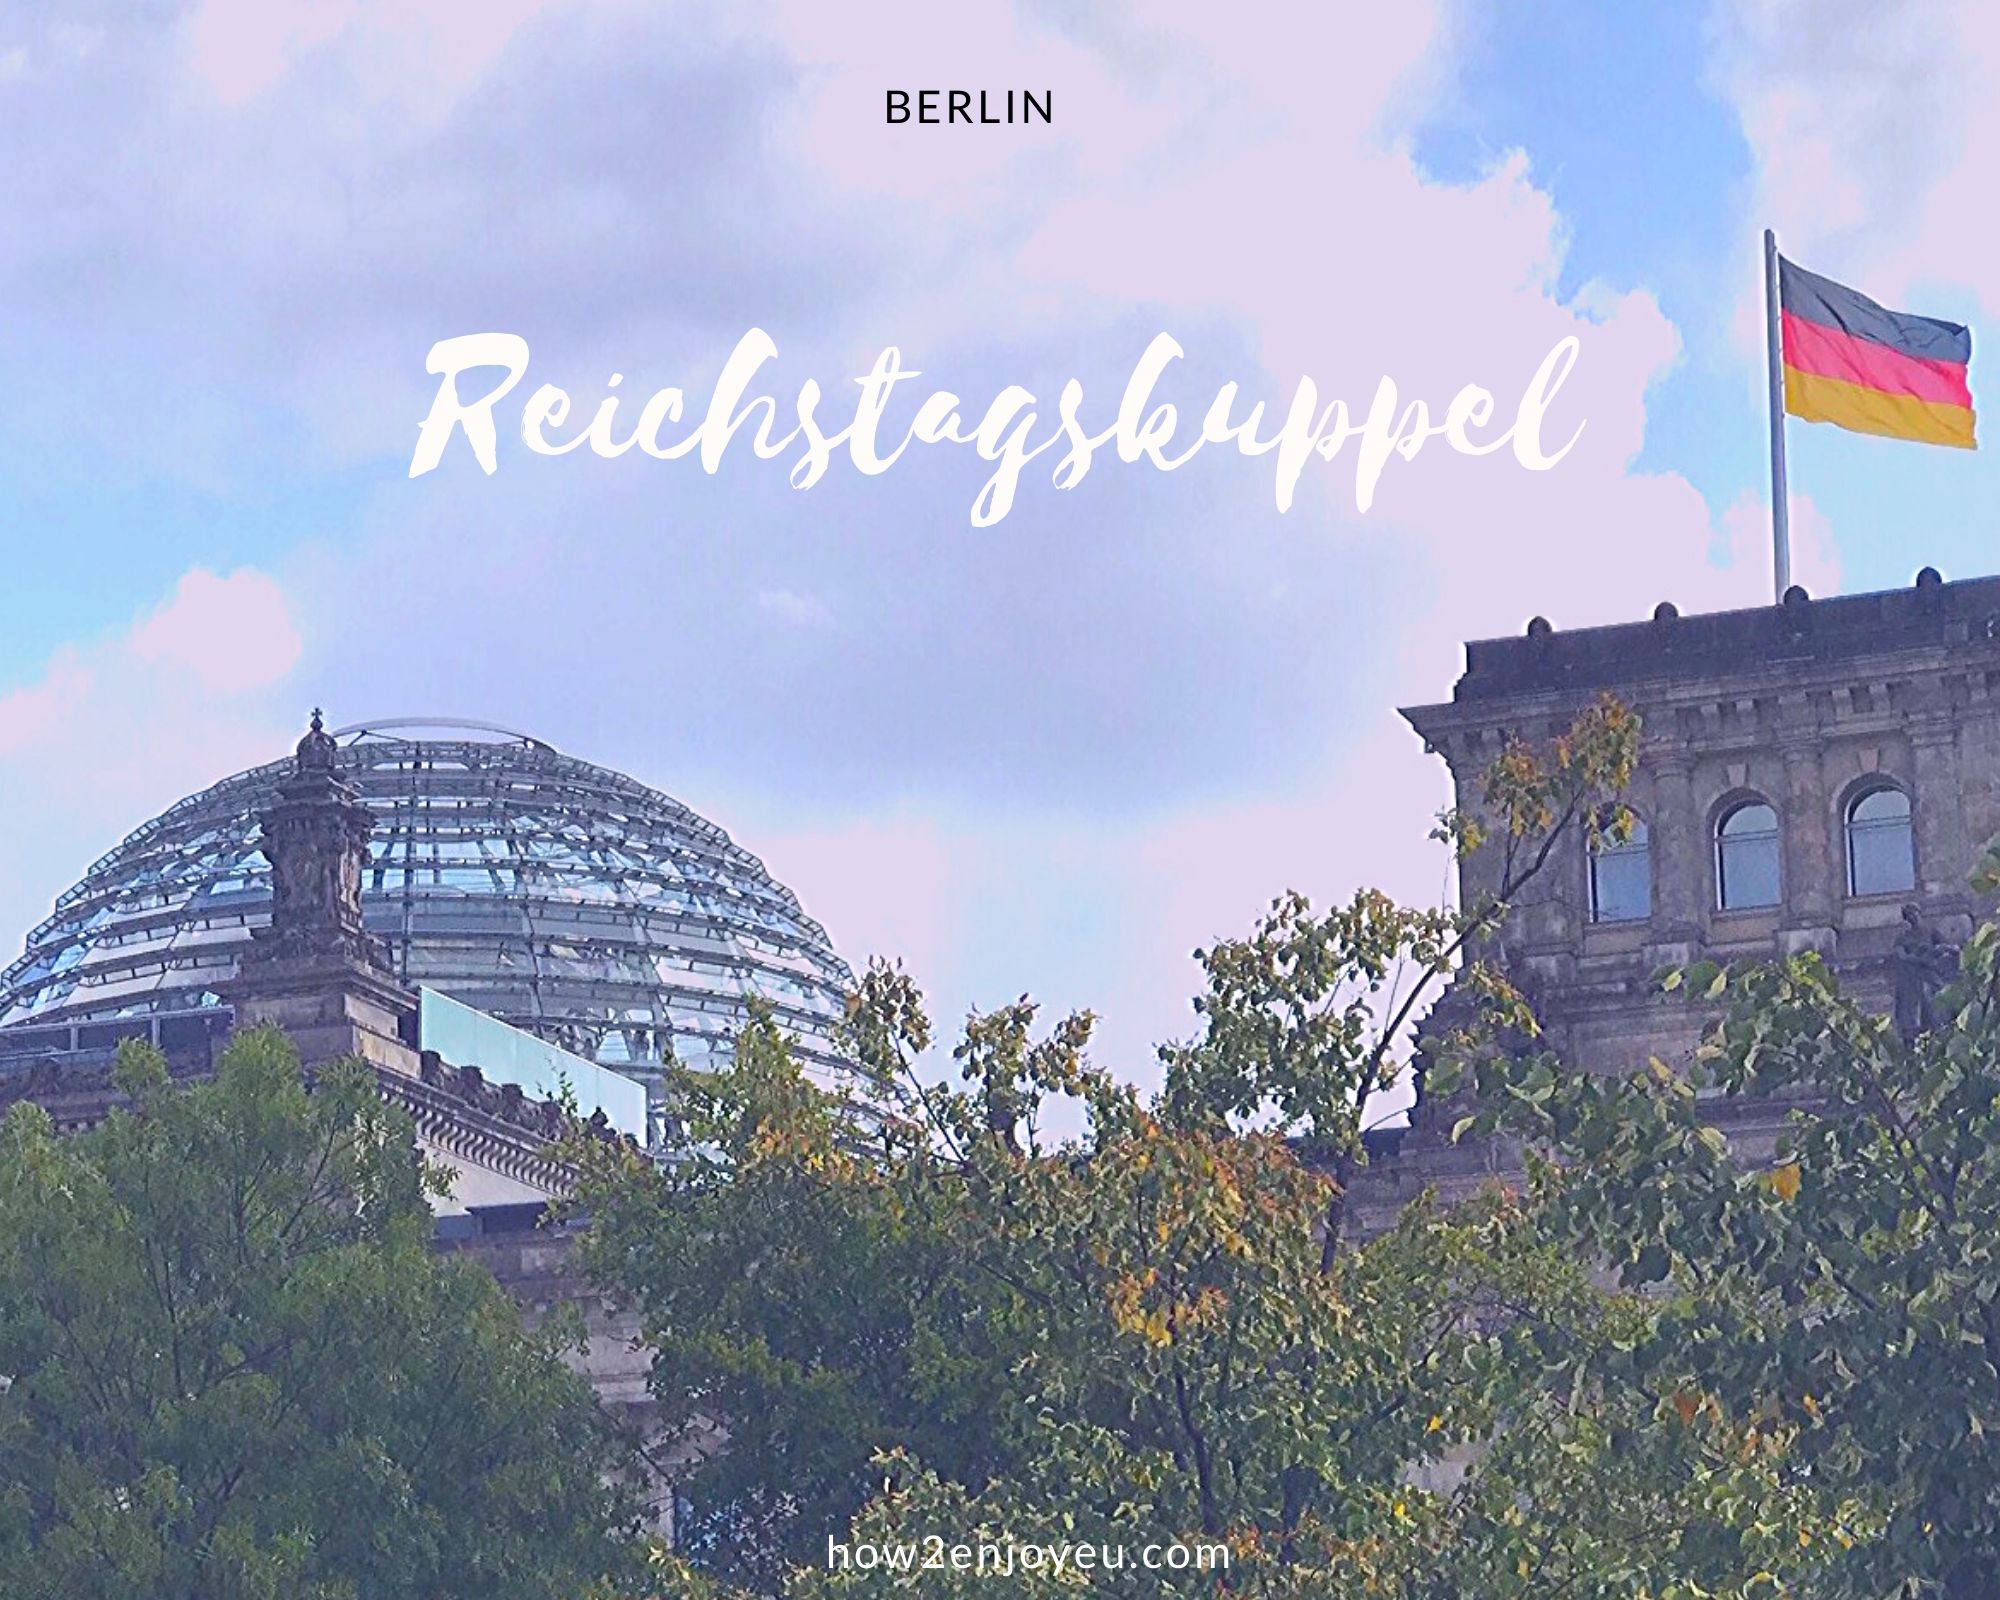 You are currently viewing ベルリン、国会議事堂のガラス・ドームの見学には予約が必要【Reichstag】